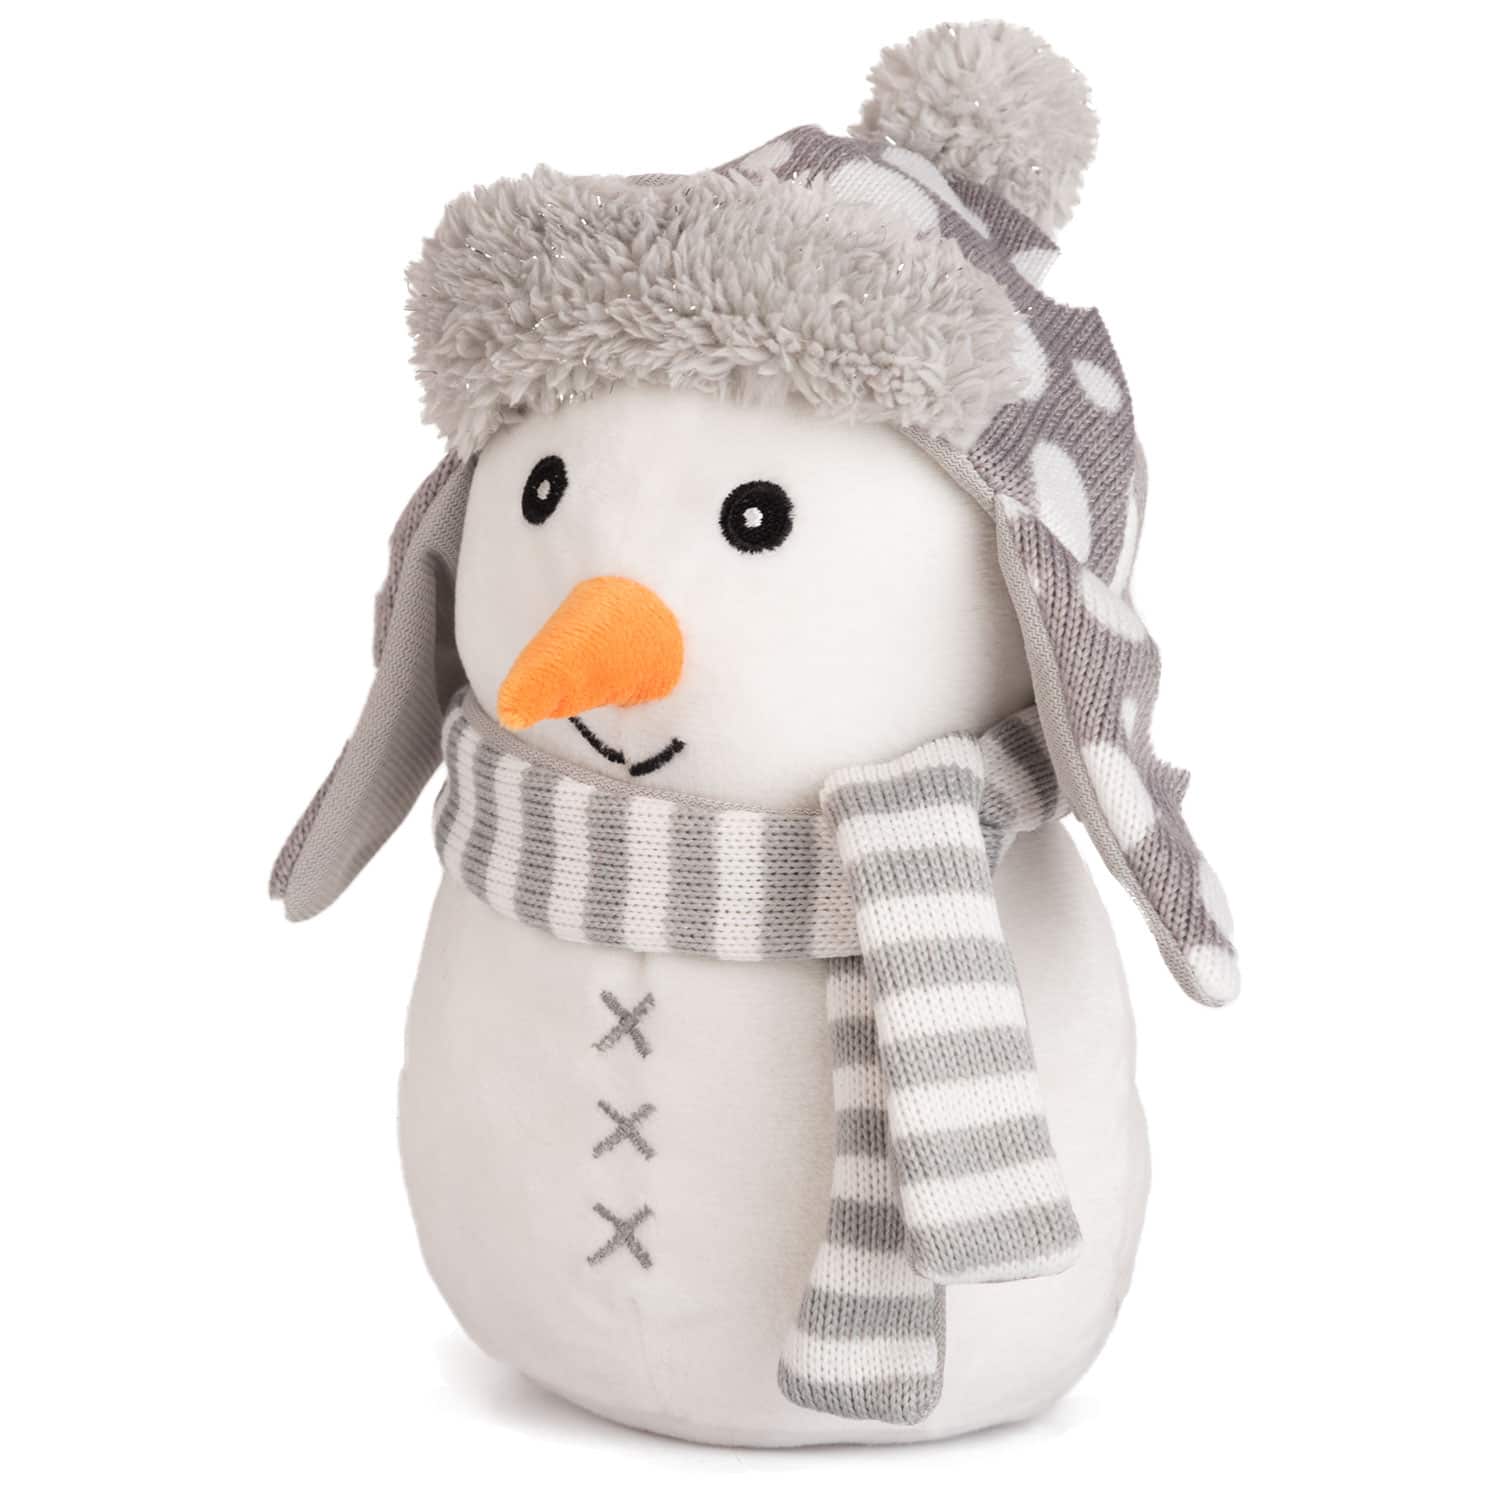 Snowman with grey hat and scarf